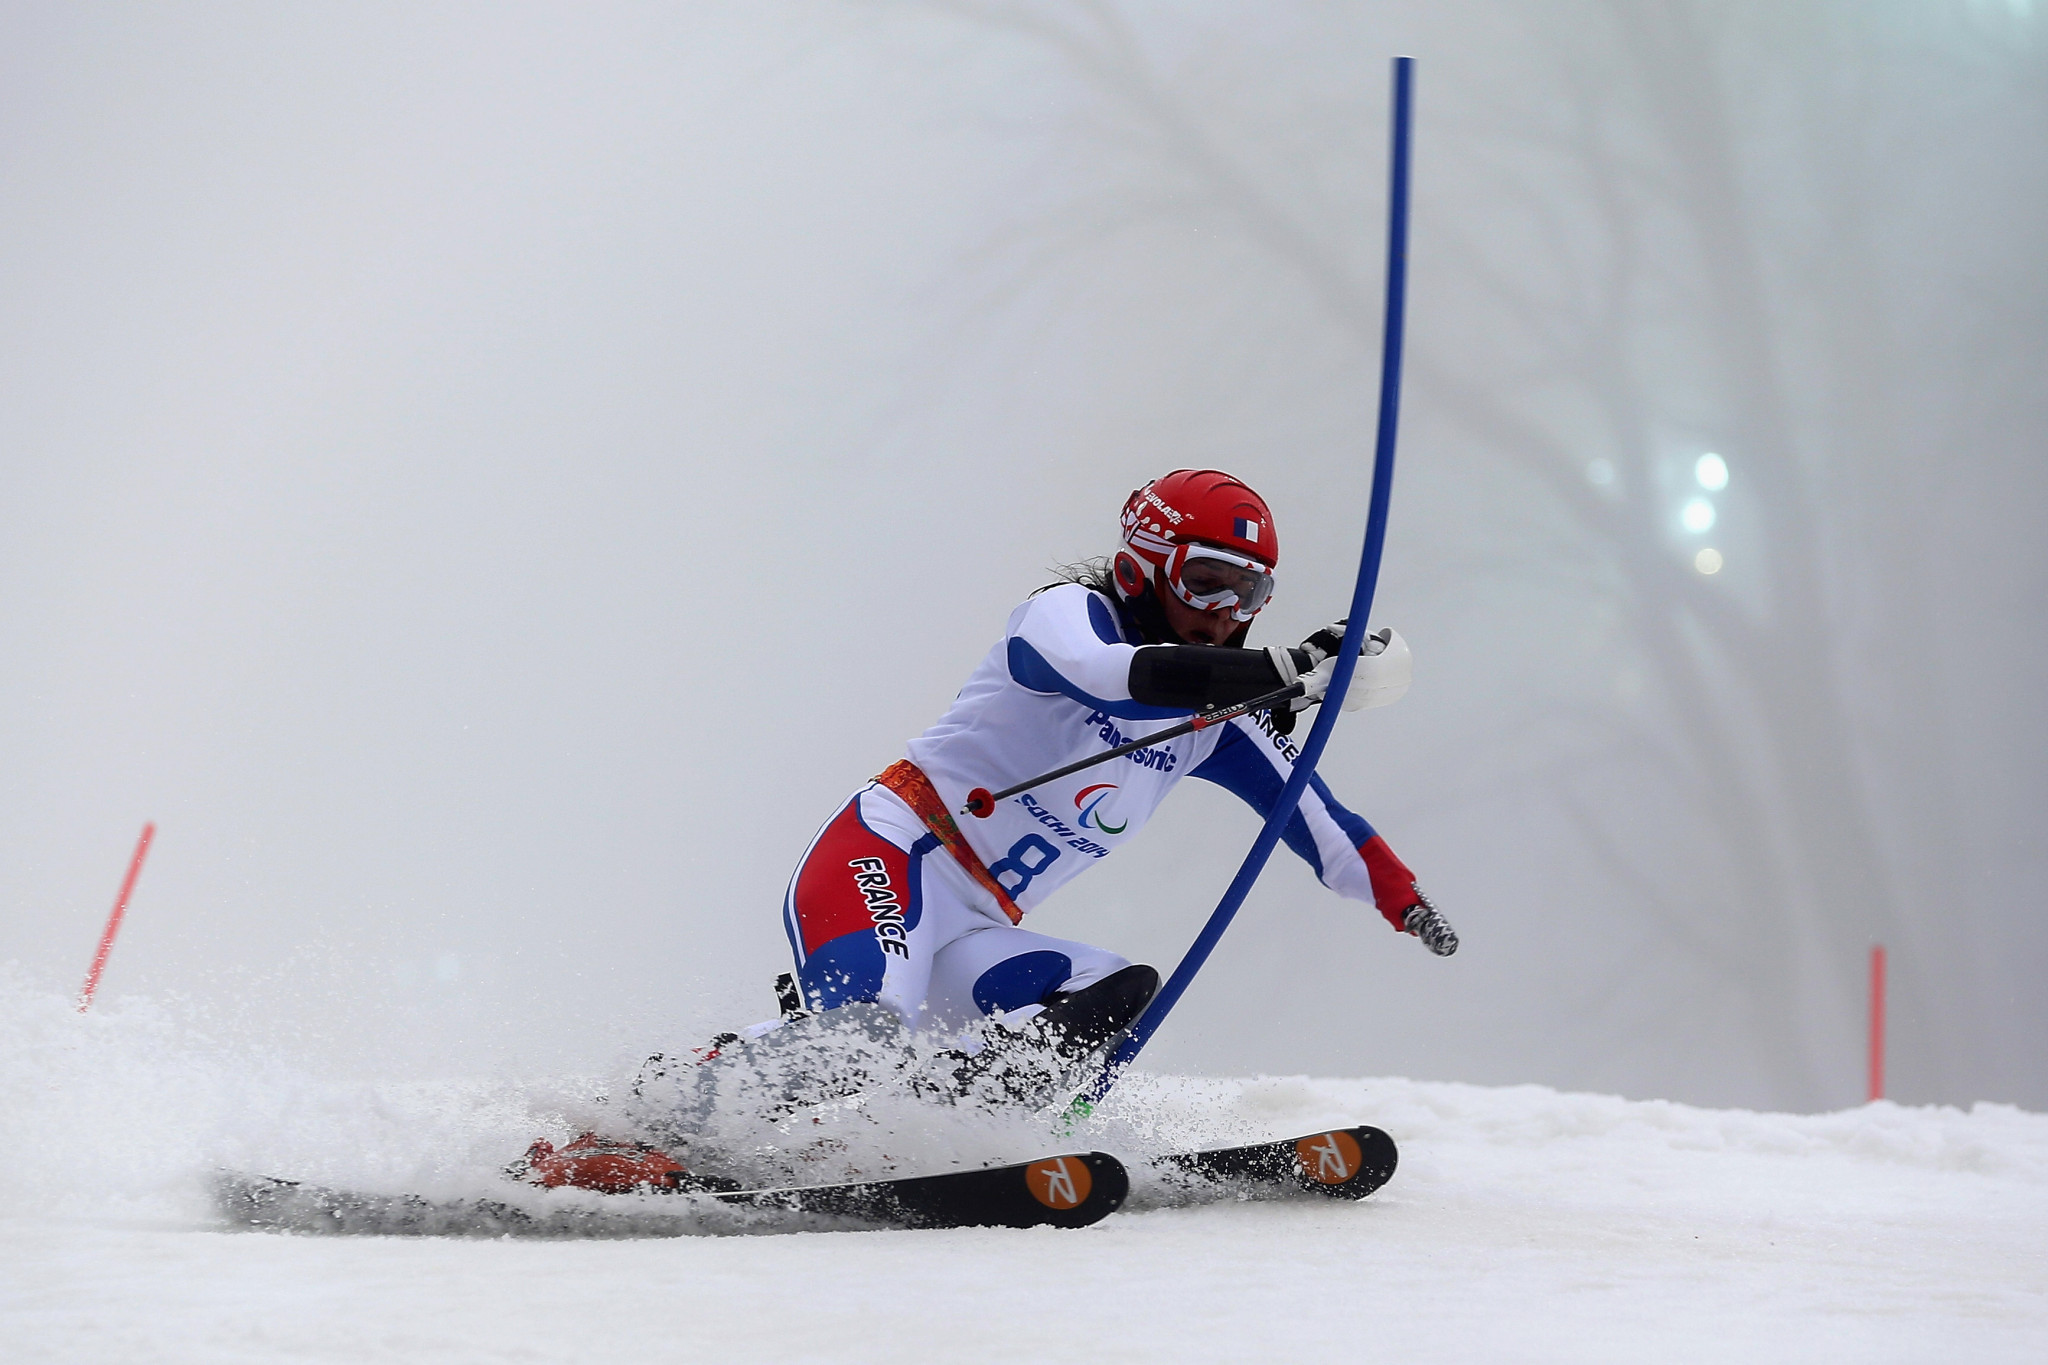 France's Marie Bochet took victory in the women's standing event ©Getty Images